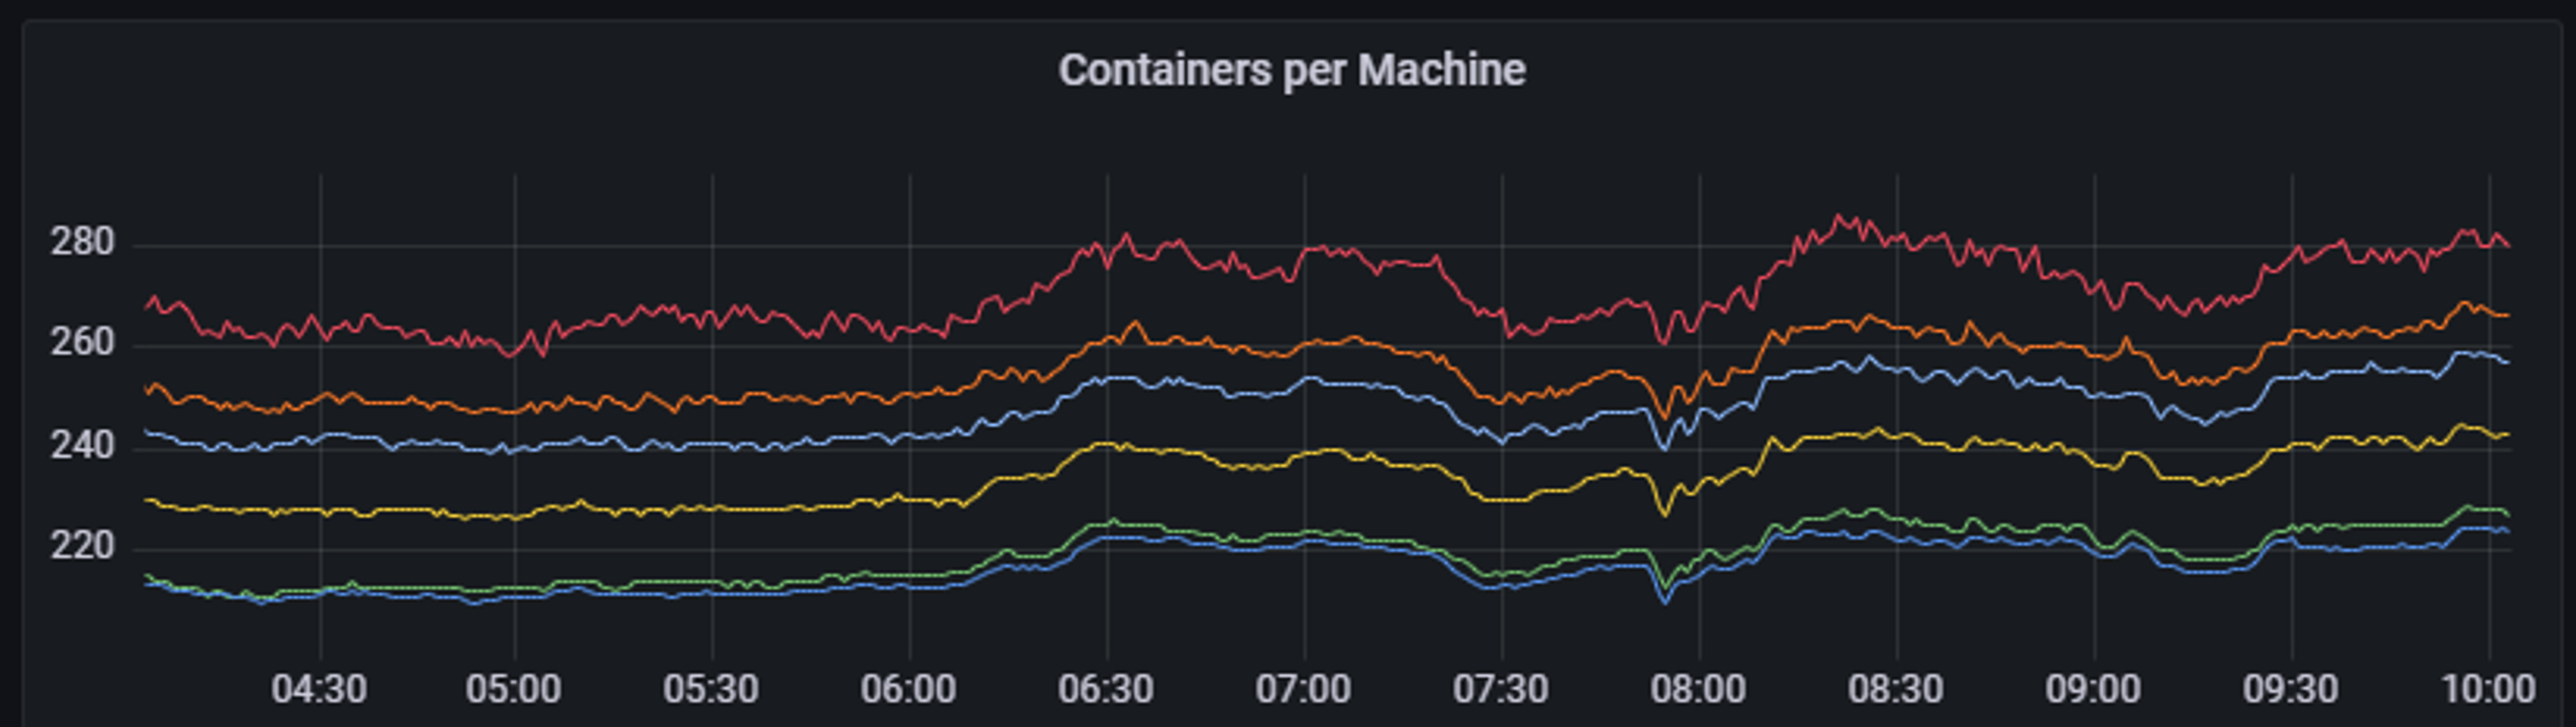 Container count variance greatly reduced between median and 99th percentile